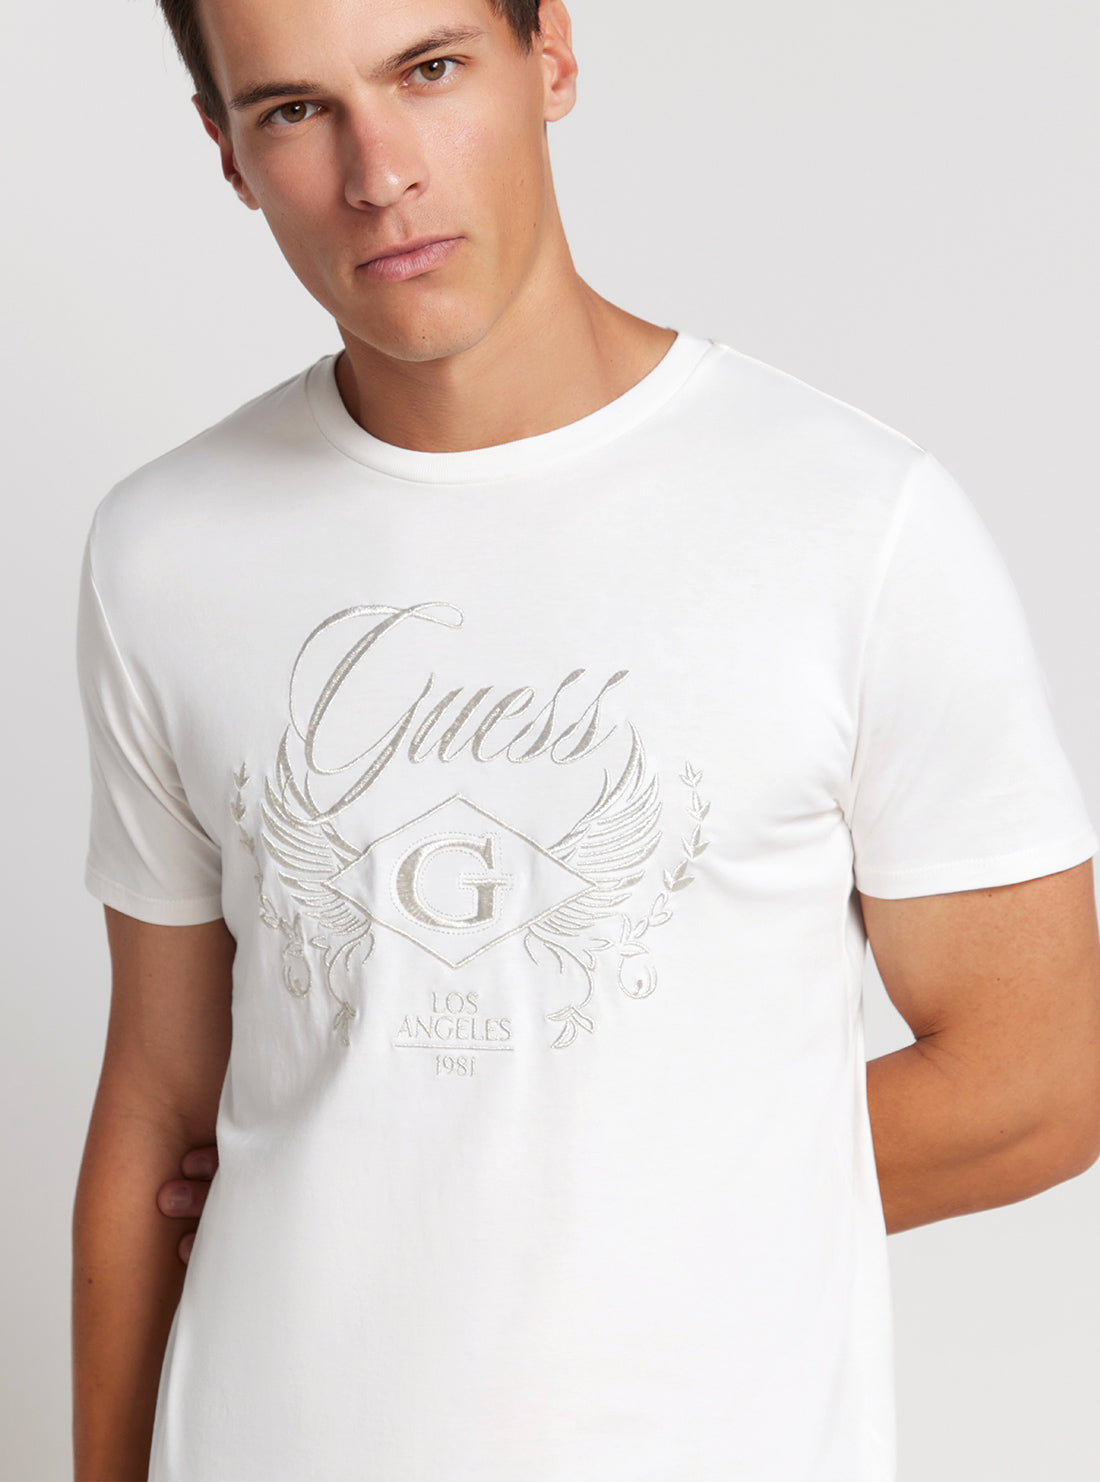 GUESS Eco White Wing Crest T-Shirt detail view